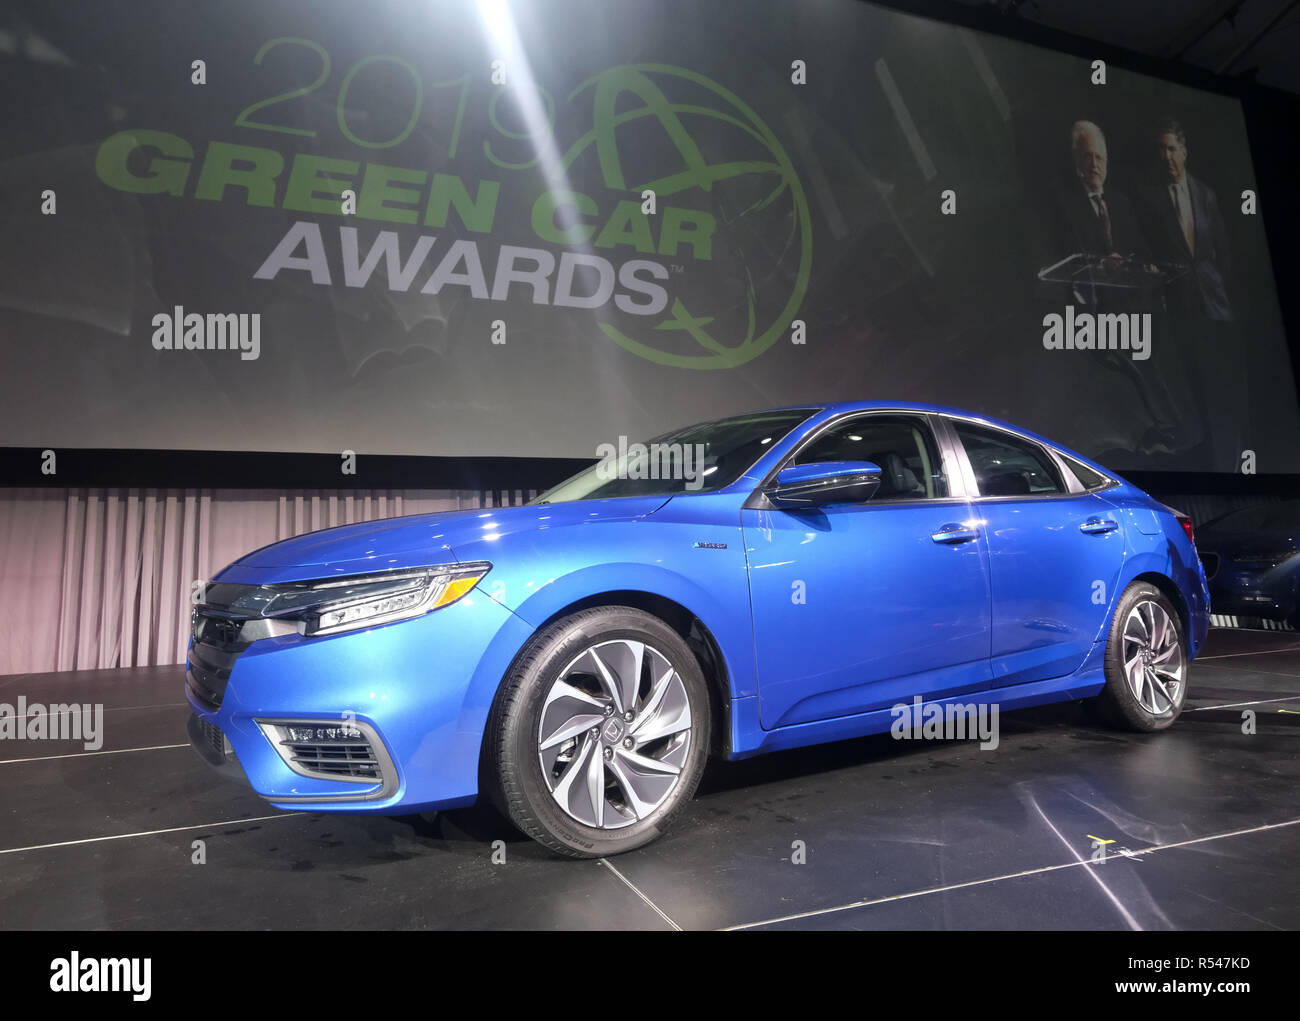 Los Angeles, California, USA. 29th Nov, 2018. The Honda Insight is unveiled after it was announced as the winner of the 2019 Green Car of the Year Award at the Los Angeles Auto Show, Thursday, Nov. 29, 2018, in Los Angeles. The Honda's third generation Insight hybrid sedan was named the winner of the 2019 Green Car of the Year Award. Credit: Ringo Chiu/ZUMA Wire/Alamy Live News Stock Photo